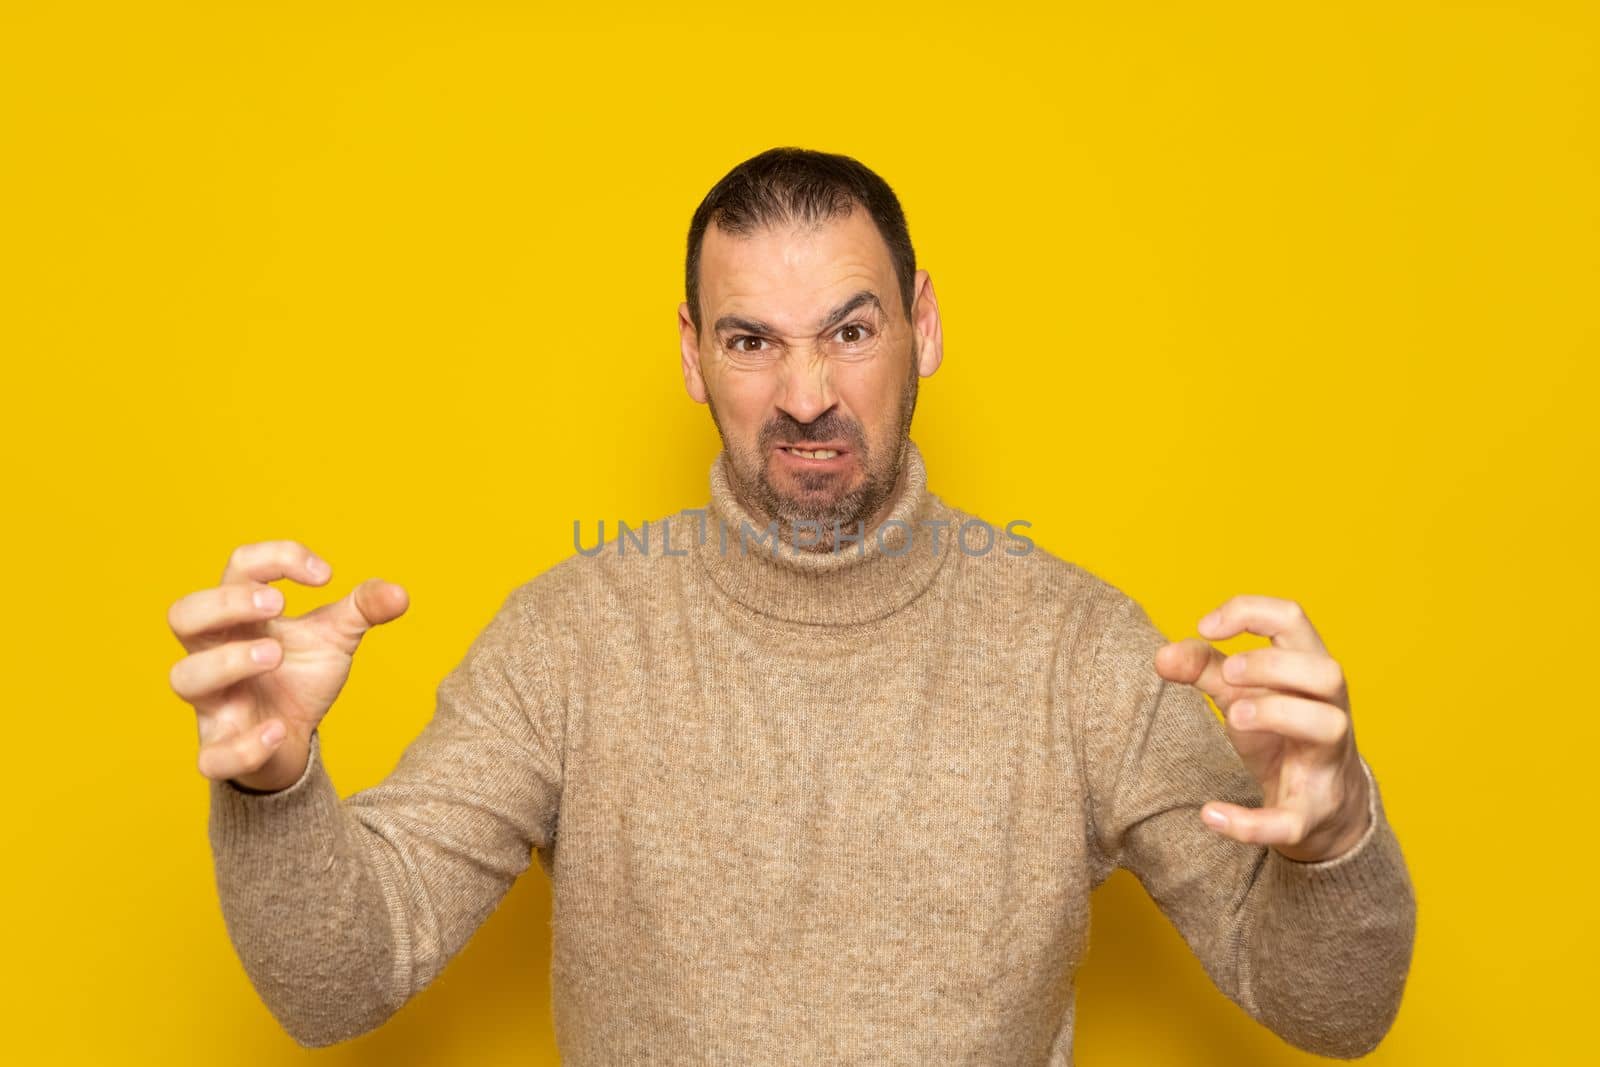 Hispanic man with beard over isolated yellow background in aggressive and furious attitude with raised hands in the shape of claws. Rage and irreverence concept